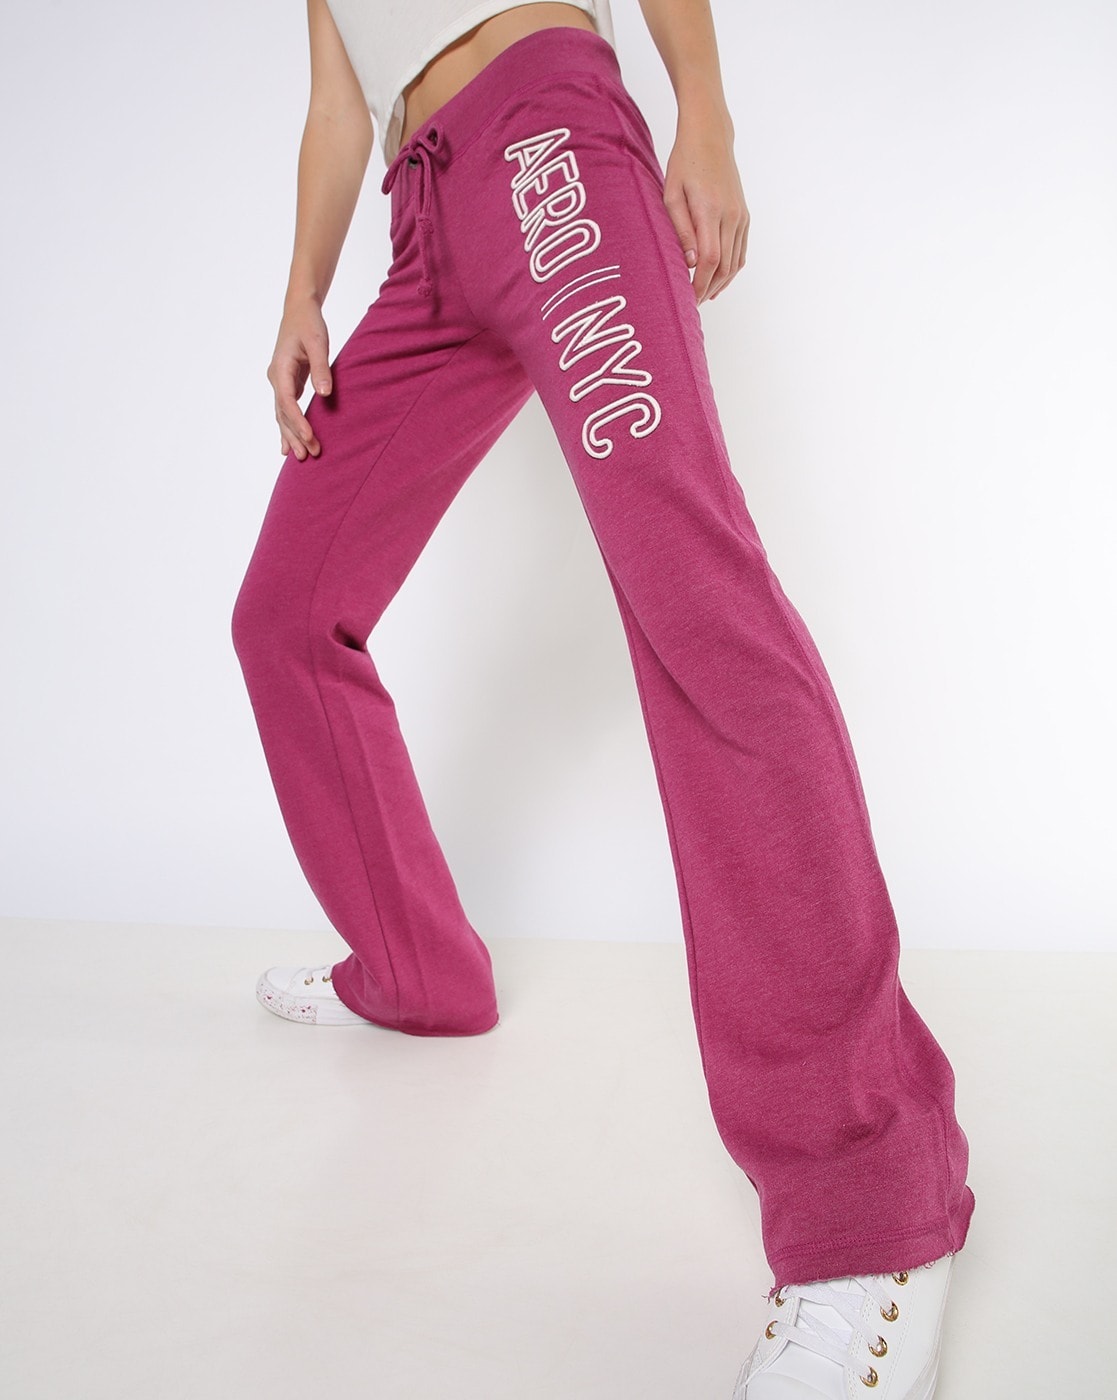 Aeropostale Elastic Waistband Drawstring Womens Joggers with Pockets,  Printed Logo Along Leg Yoga Pants, Pink, X-Large : Buy Online at Best Price  in KSA - Souq is now : Fashion